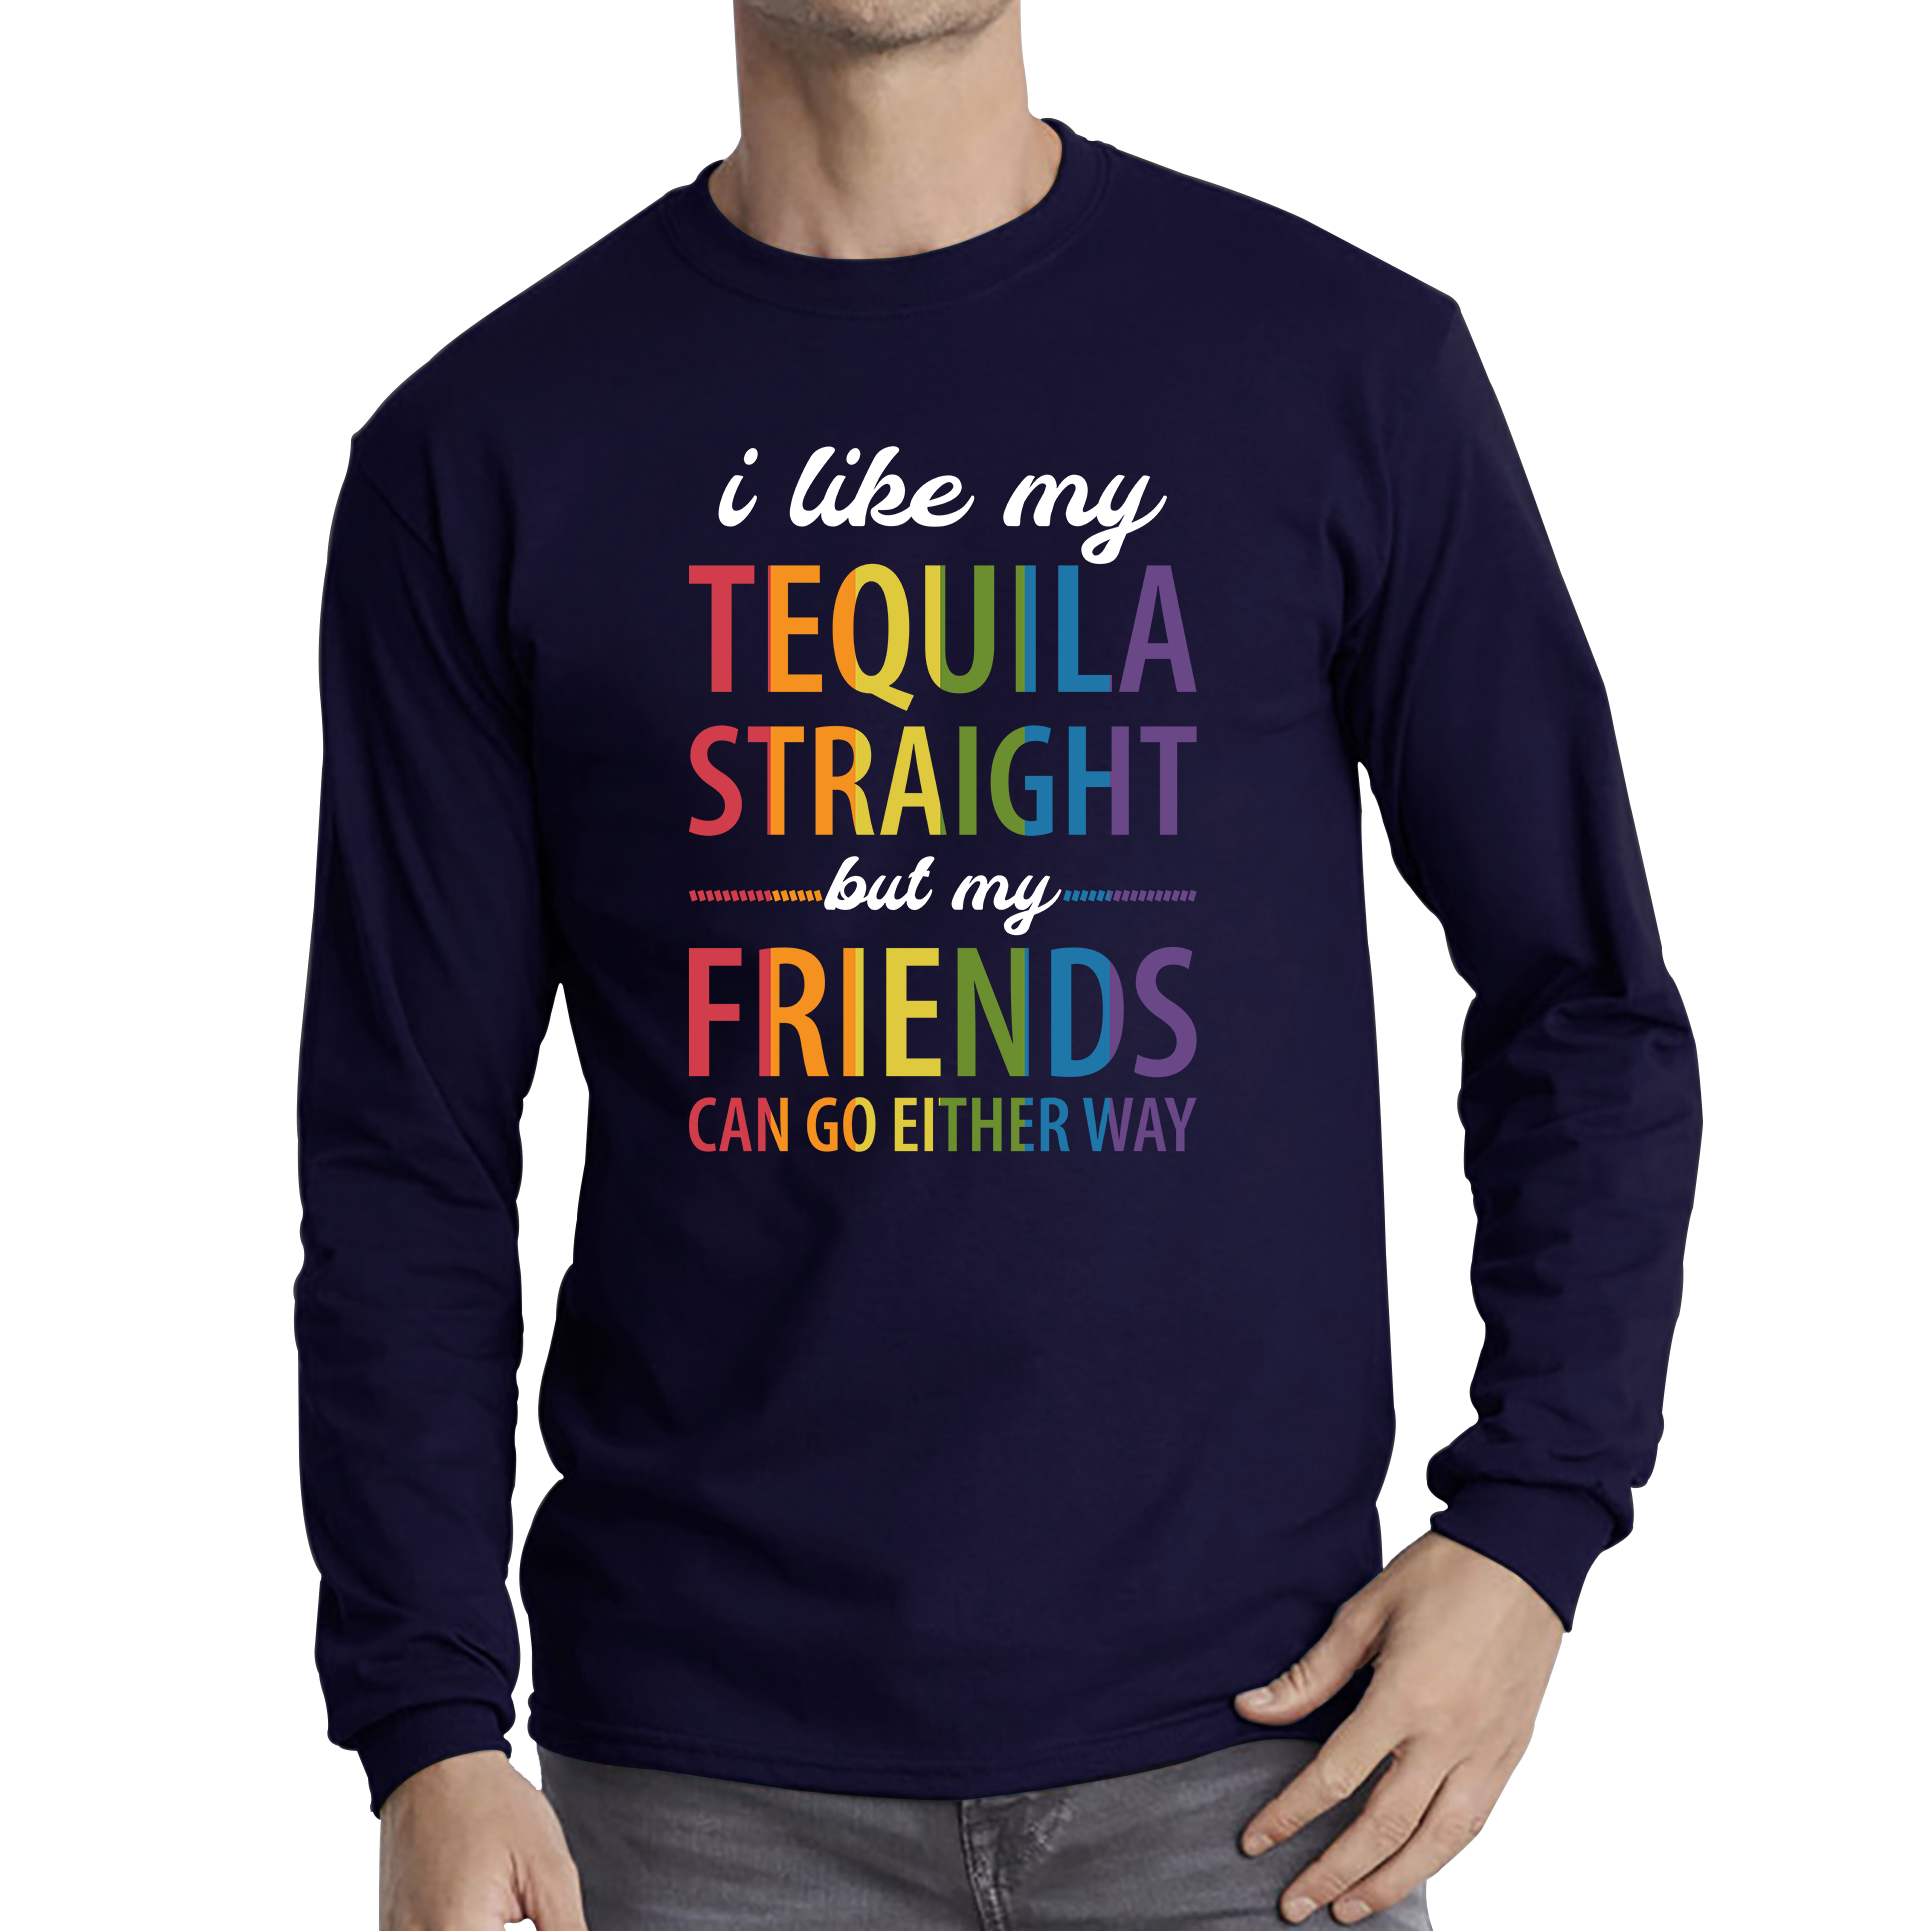 I Like My Tequila Straight But My Friends Can Go Either Way LGBTQ Pride Month Equality Pride Parade Long Sleeve T Shirt